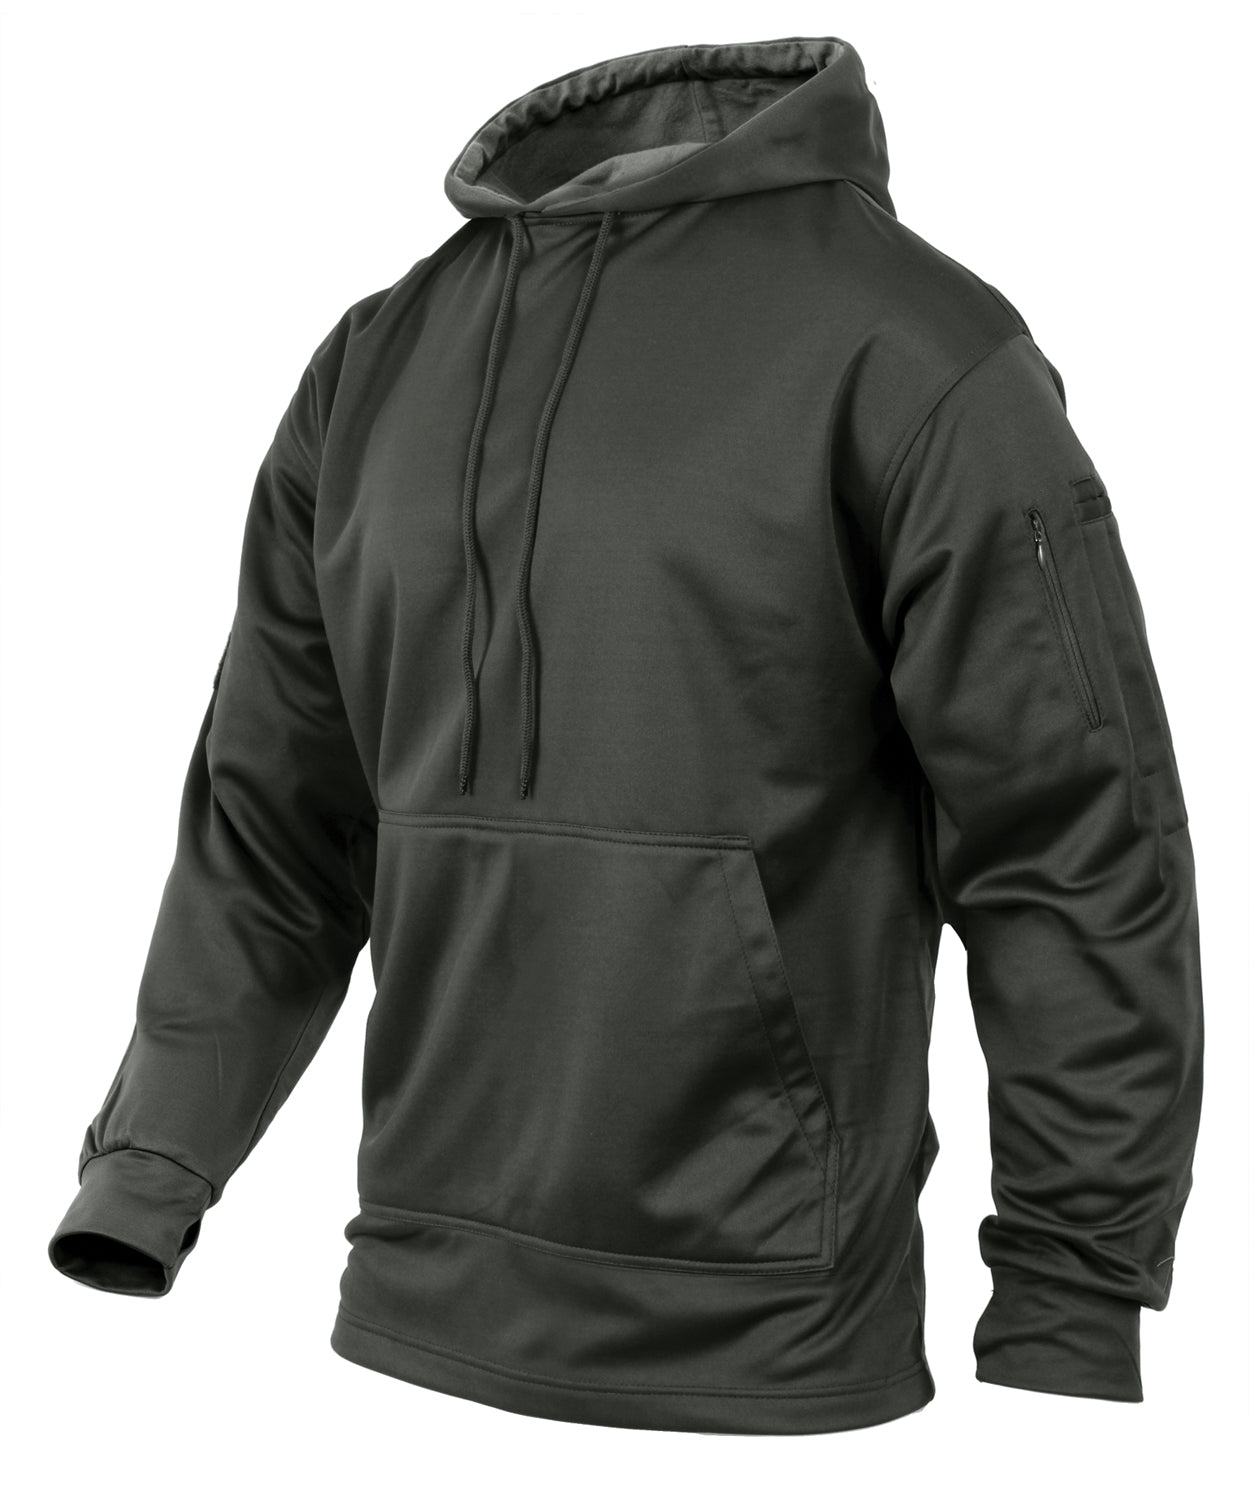 Milspec Concealed Carry Hoodie Concealed Carry Clothing MilTac Tactical Military Outdoor Gear Australia